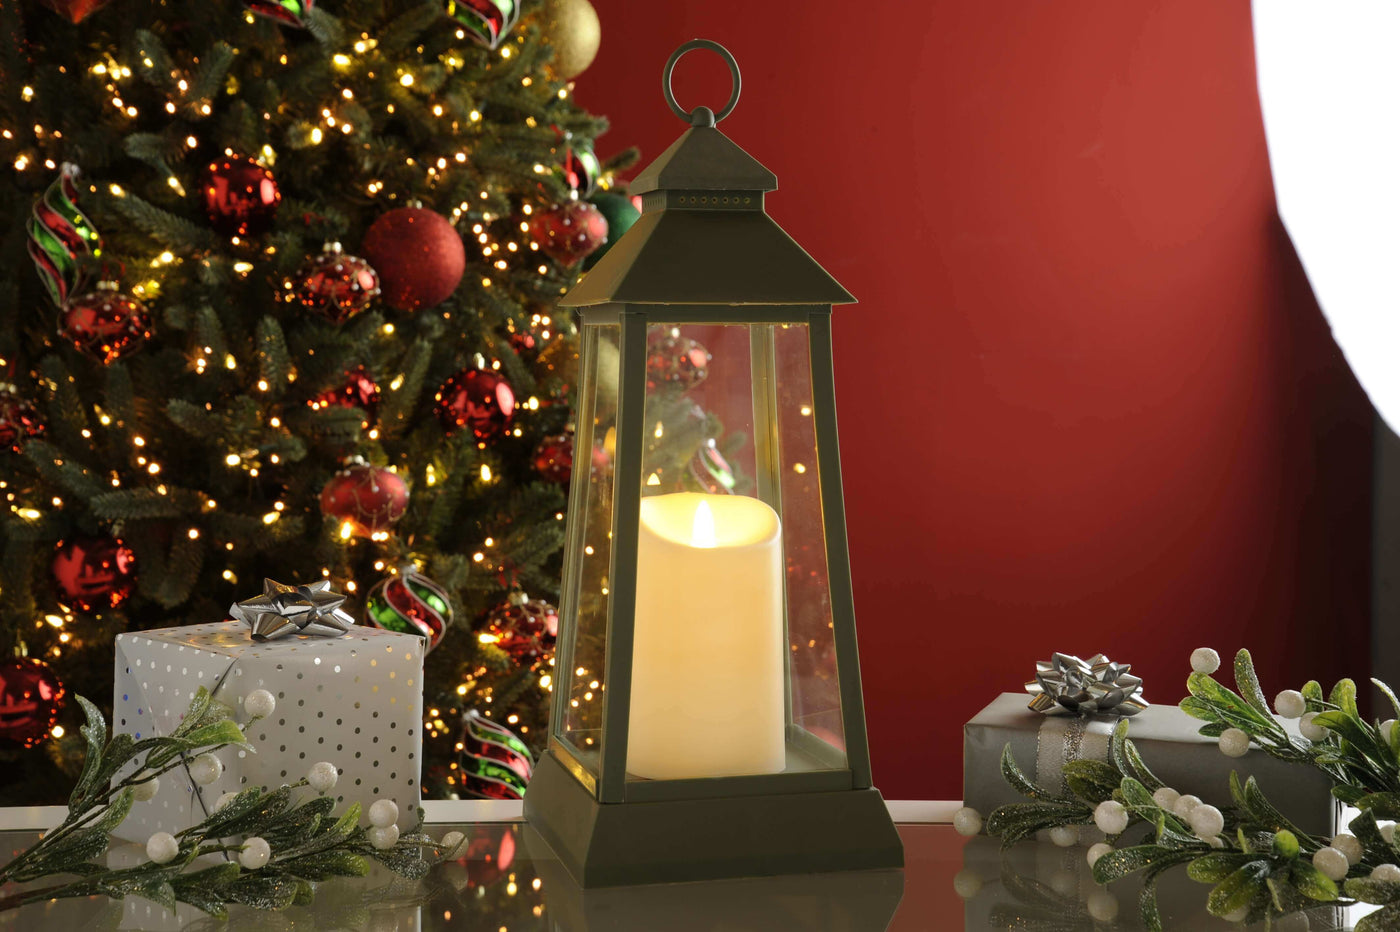 Lantern with candle on table with Christmas Tree and gifts in the background